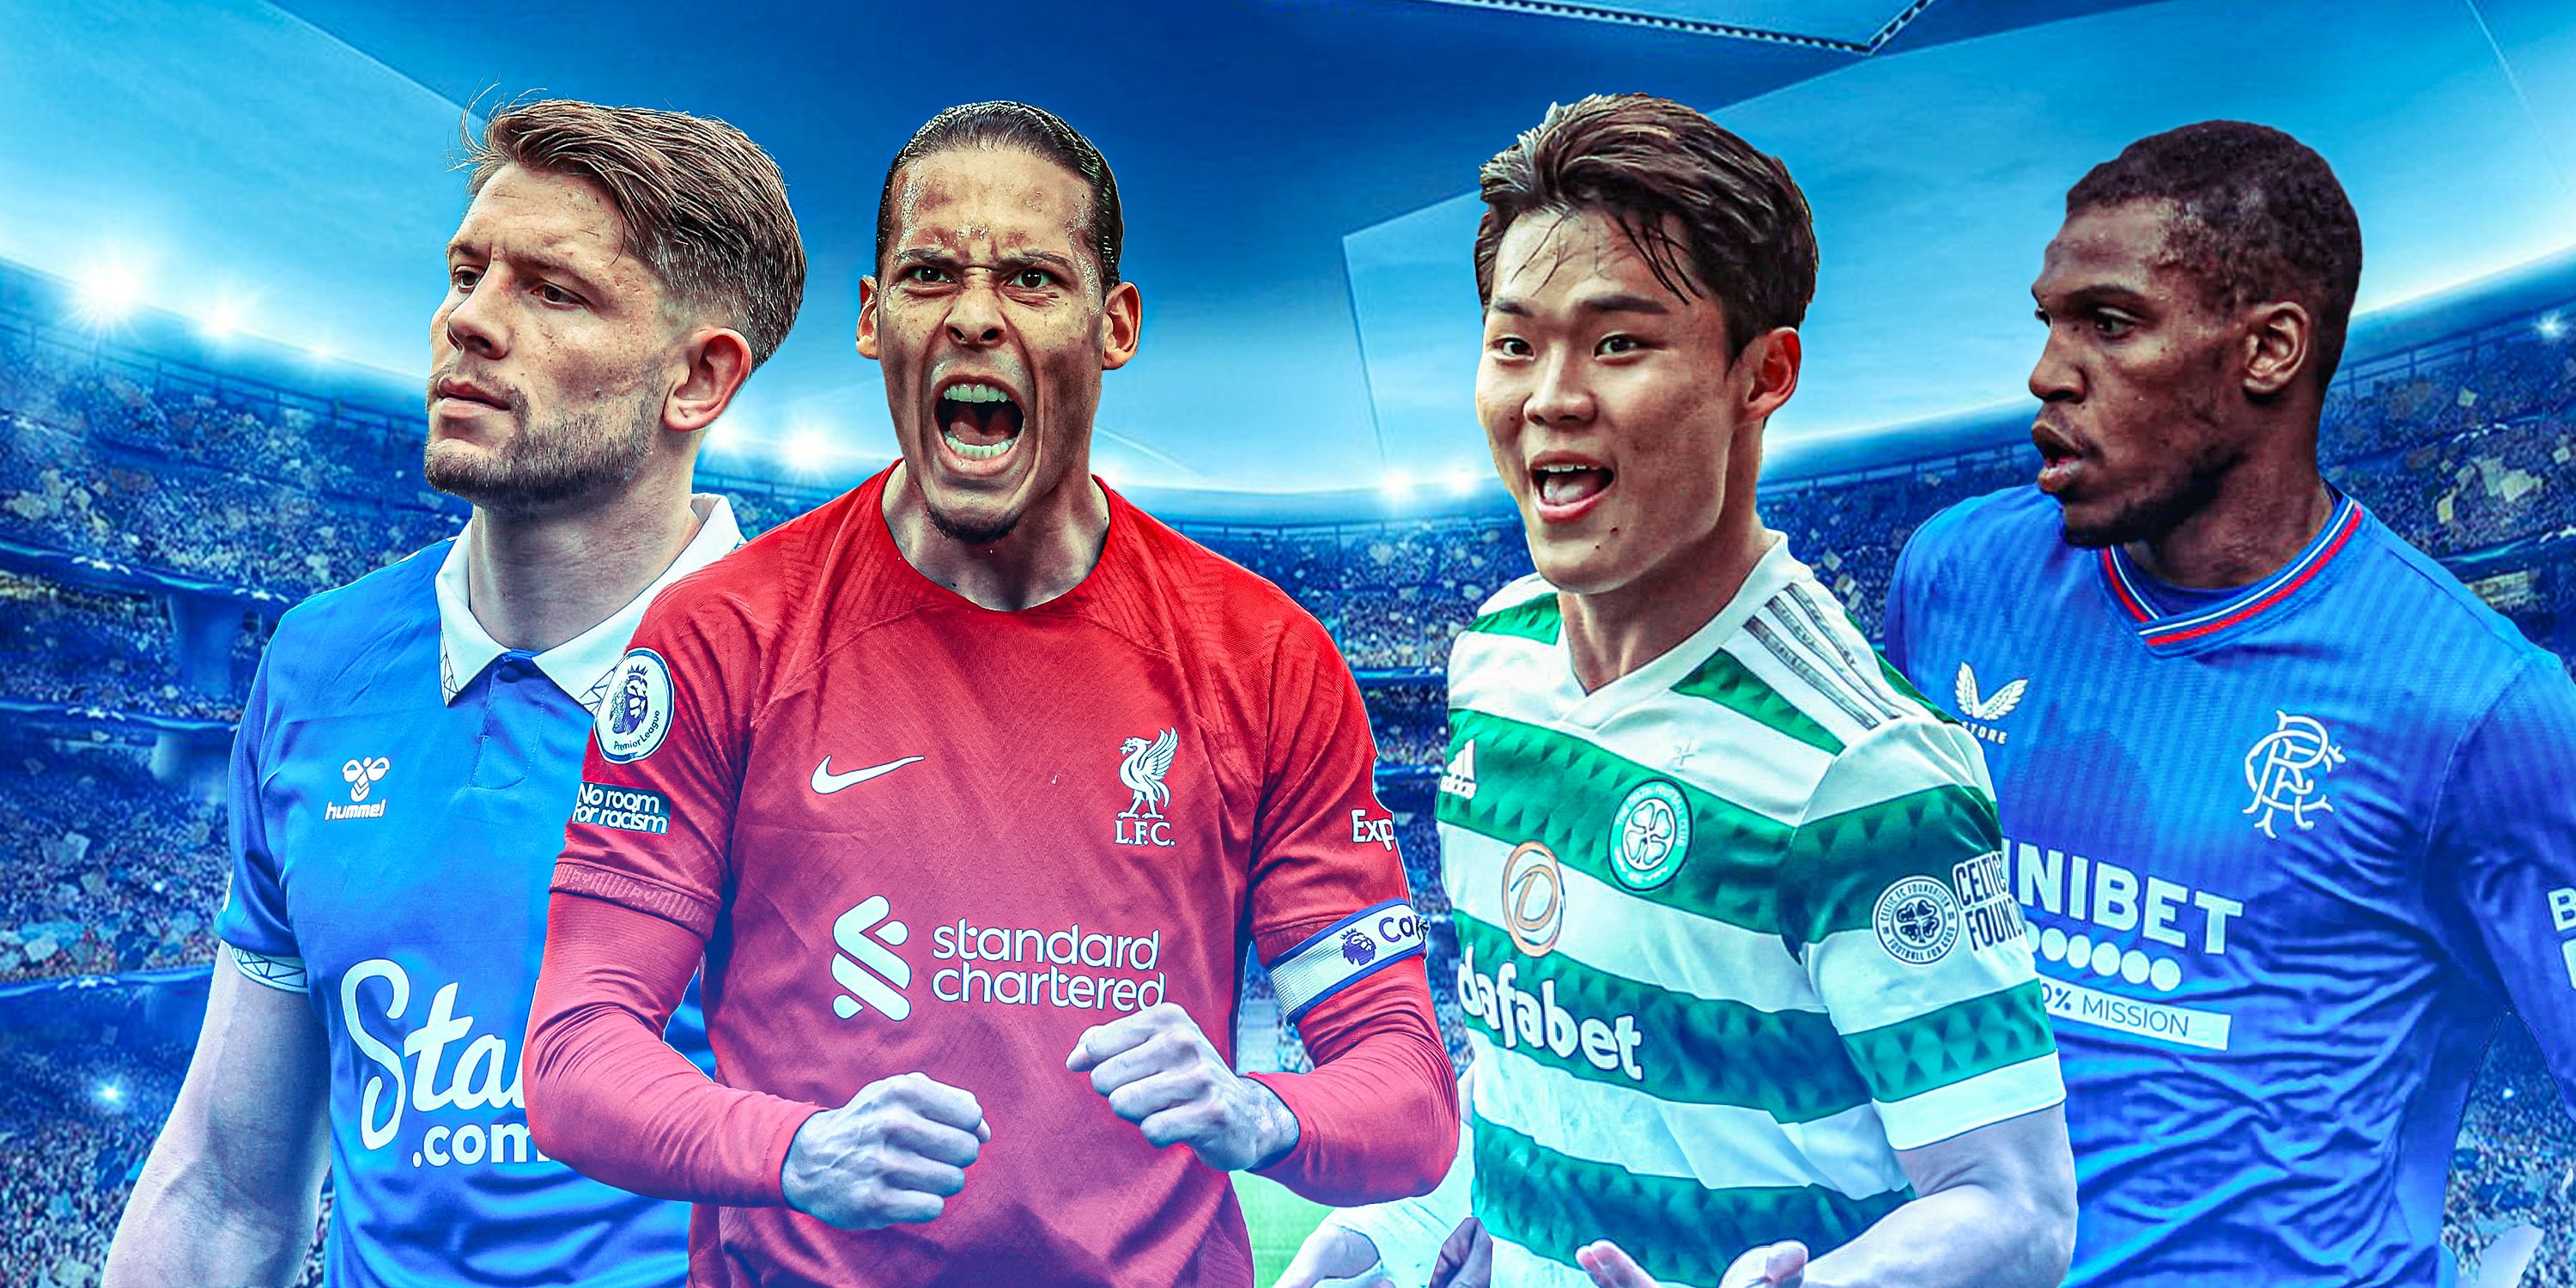 A custom image of Everton's James Tarkowski, Liverpool's Virgil van Dijk and players from Celtic and Rangers